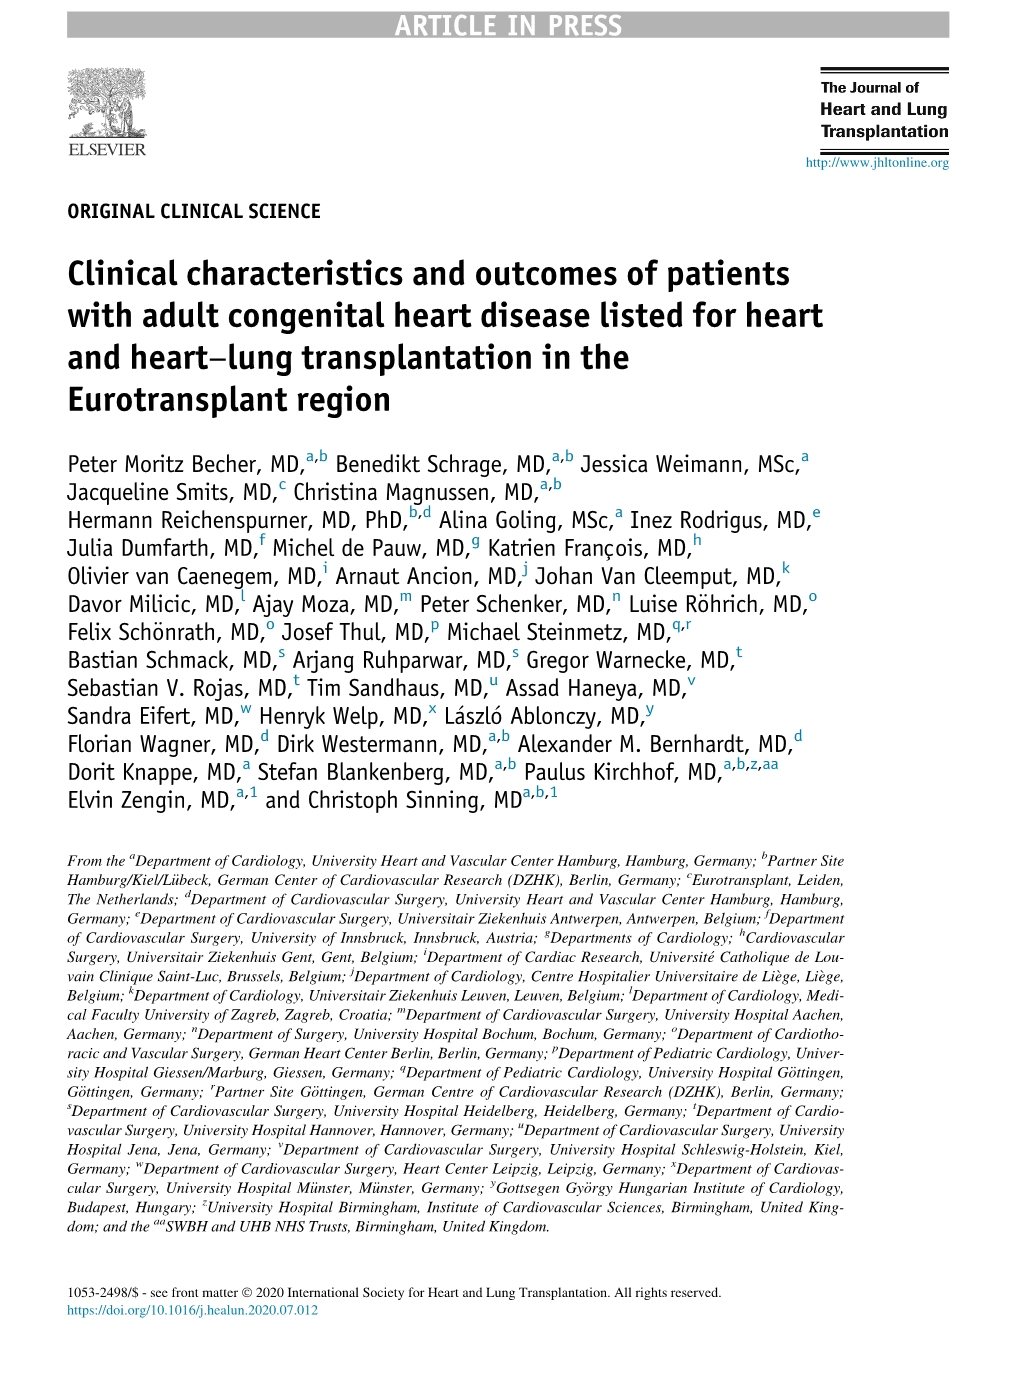 Clinical Characteristics and Outcomes of Patients with Adult Congenital Heart Disease Listed for Heart and Heart‒Lung Transplantation in the Eurotransplant Region